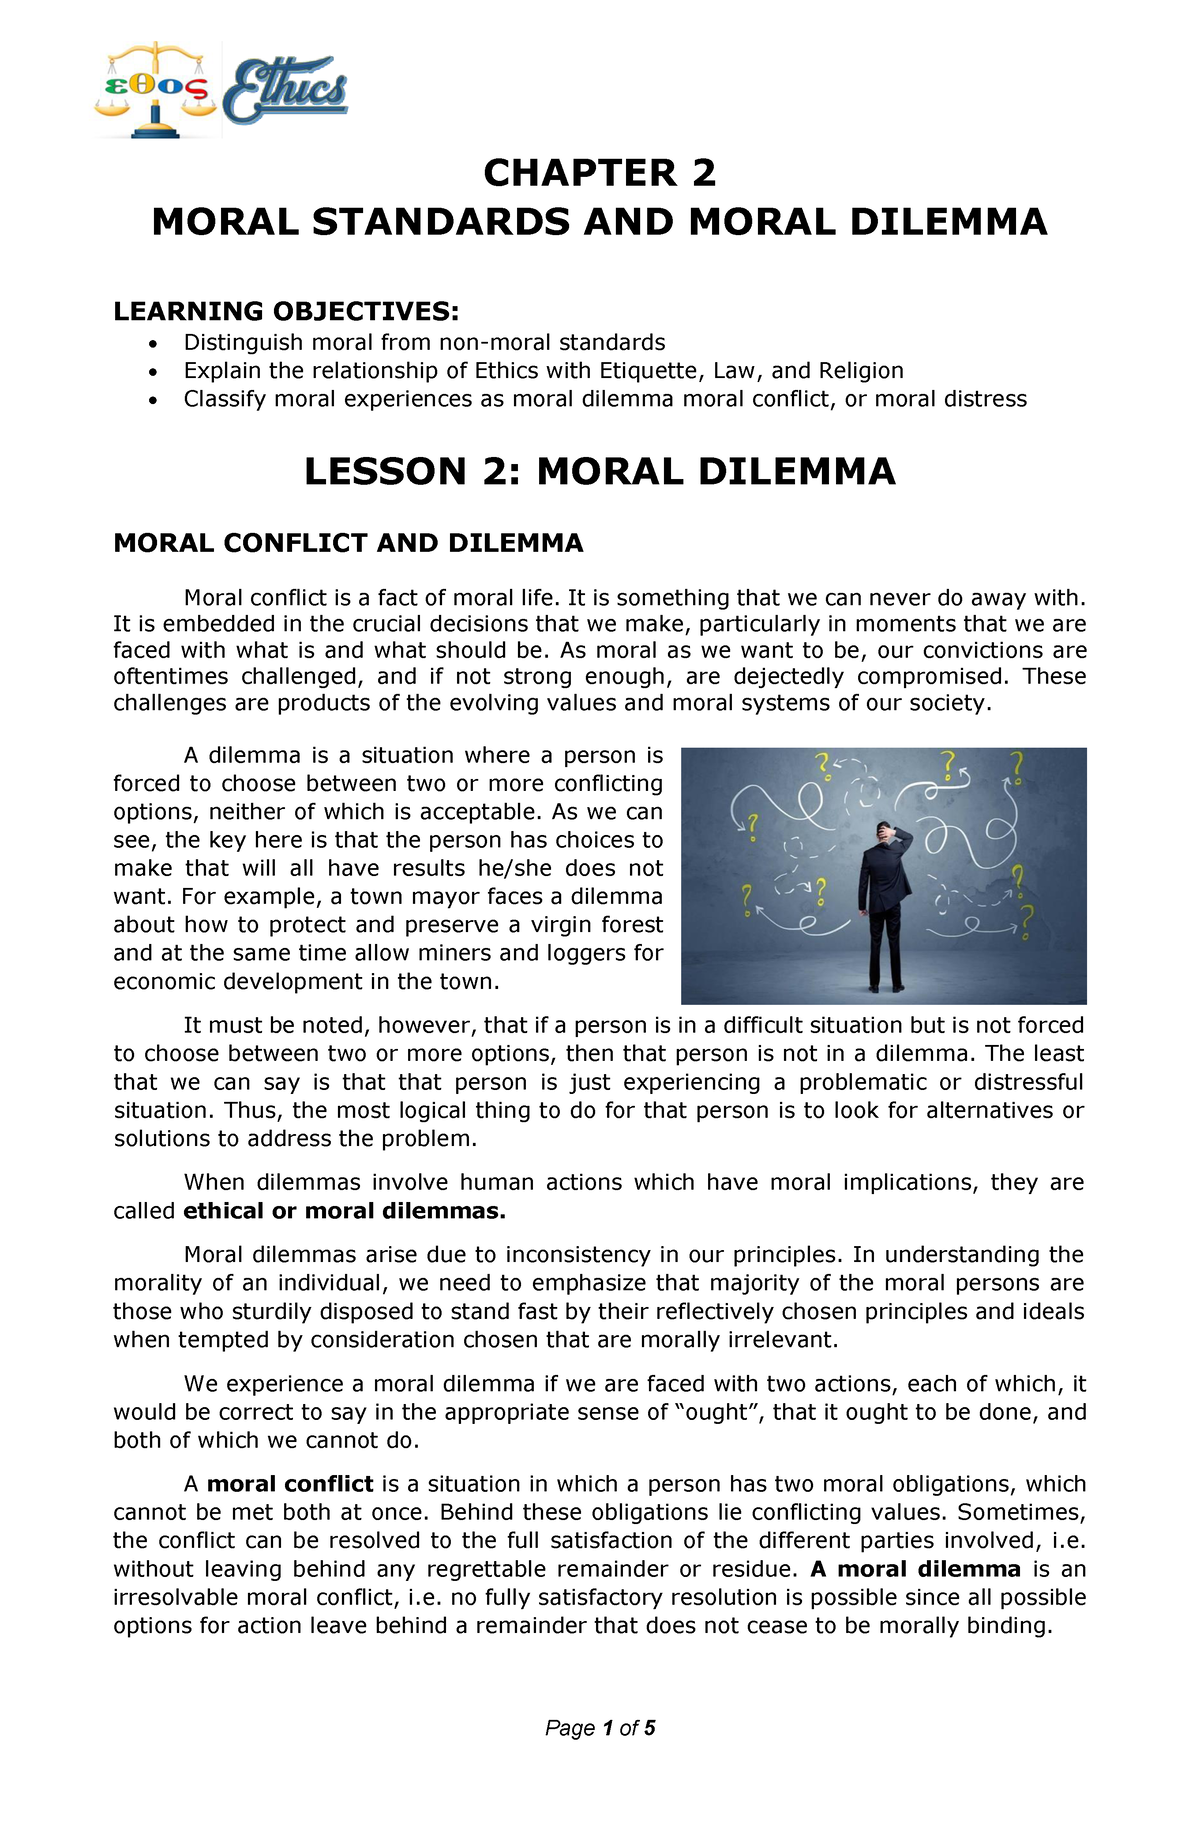 short case study about individual moral dilemma